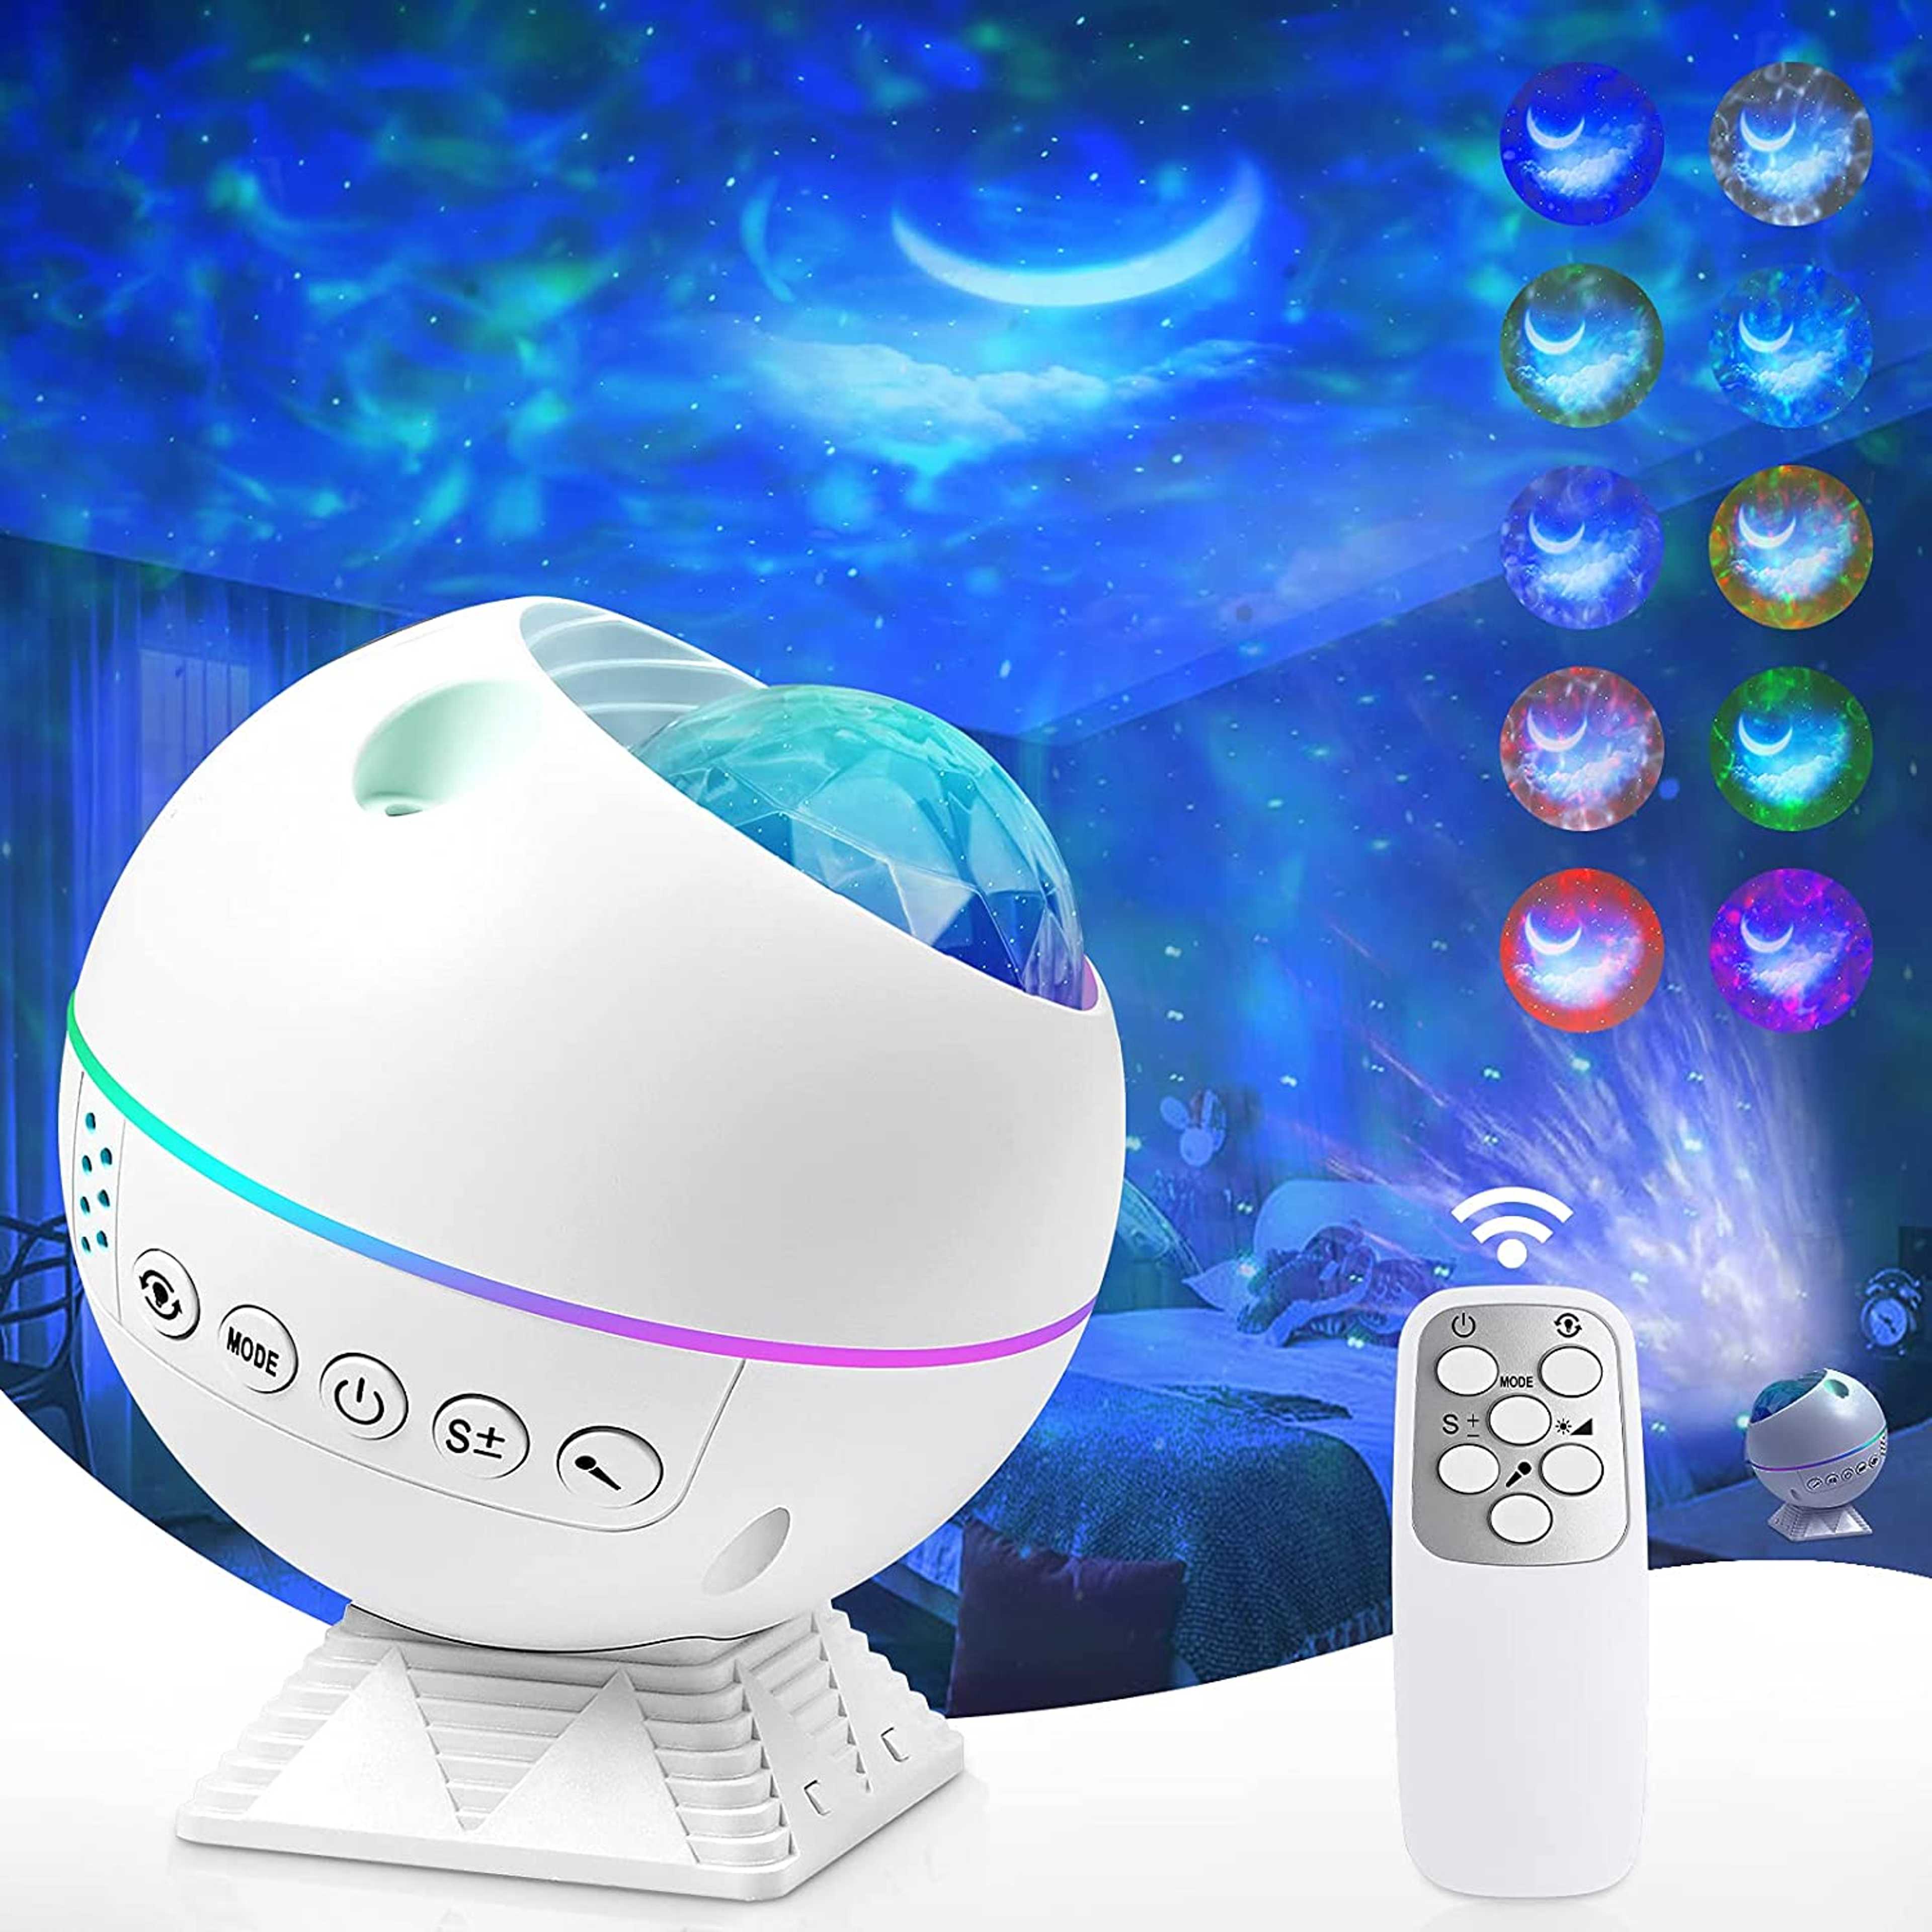 Star Night Light Projector, Galaxy Light for Bedroom, Cloudy Wave Projector with Remote Control, Voice Control & Timer, Ceiling Projector for Children...